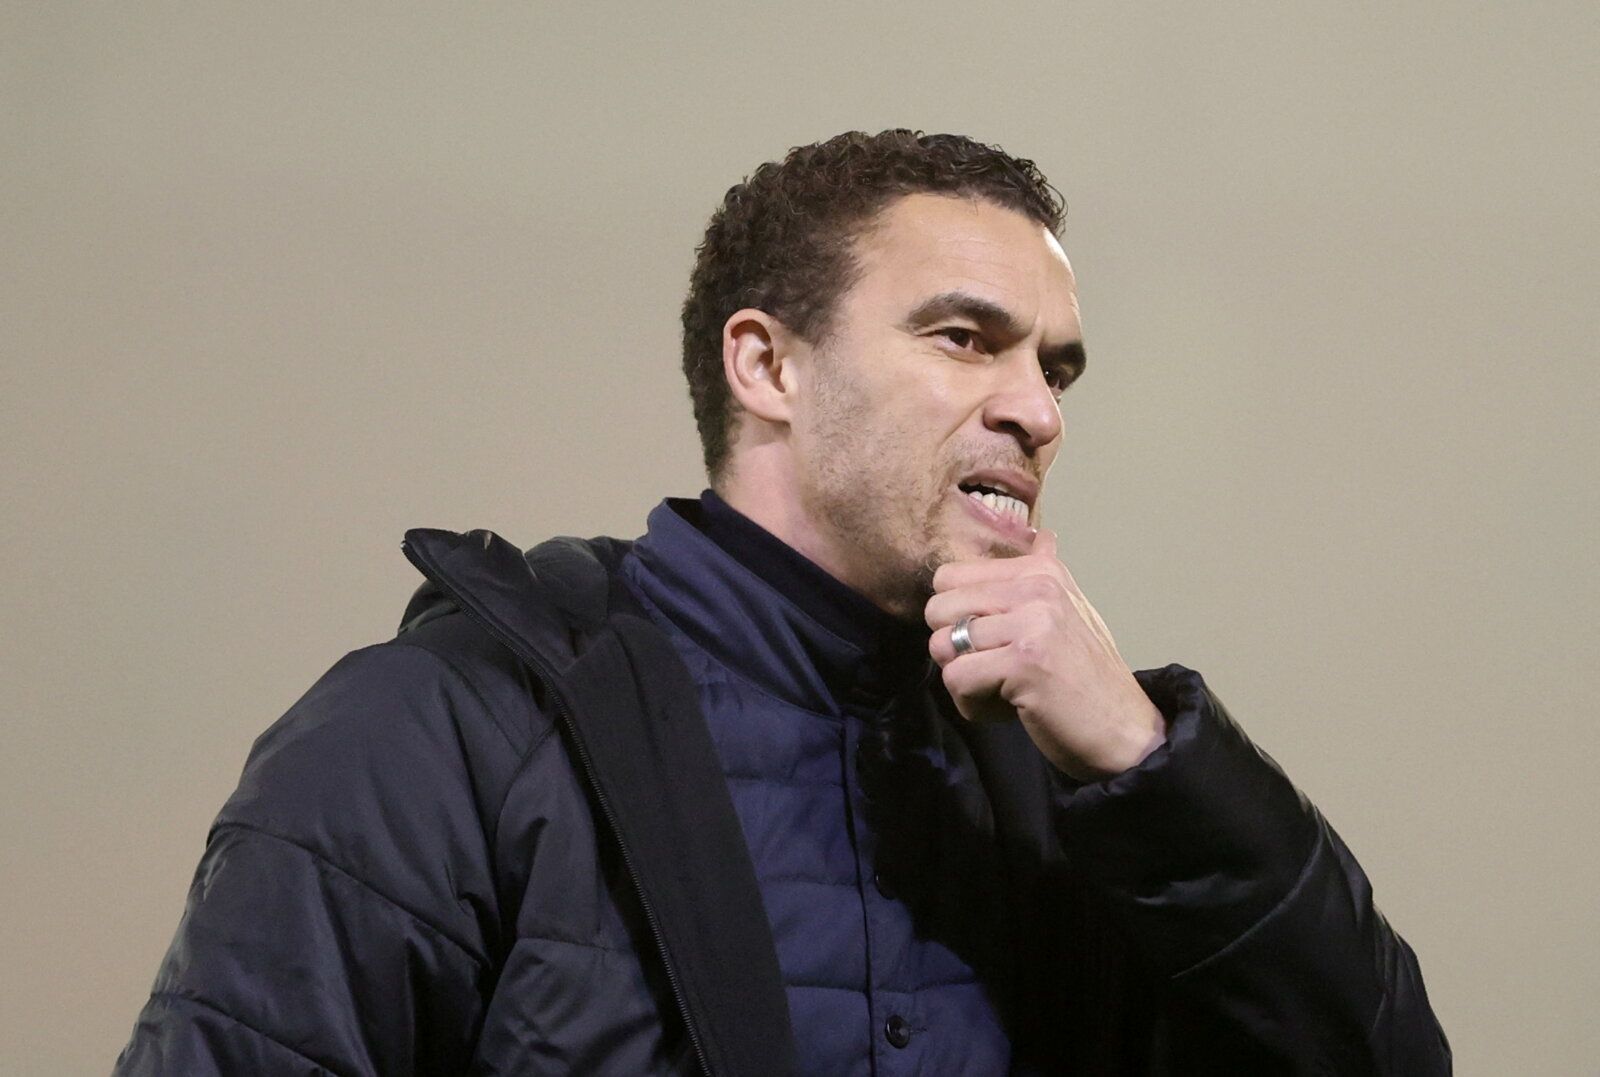 Soccer Football - Championship - Barnsley v West Bromwich Albion - Oakwell, Barnsley, Britain - December 17, 2021 West Bromwich Albion manager Valerien Ismael after the match  Action Images/Molly Darlington  EDITORIAL USE ONLY. No use with unauthorized audio, video, data, fixture lists, club/league logos or 